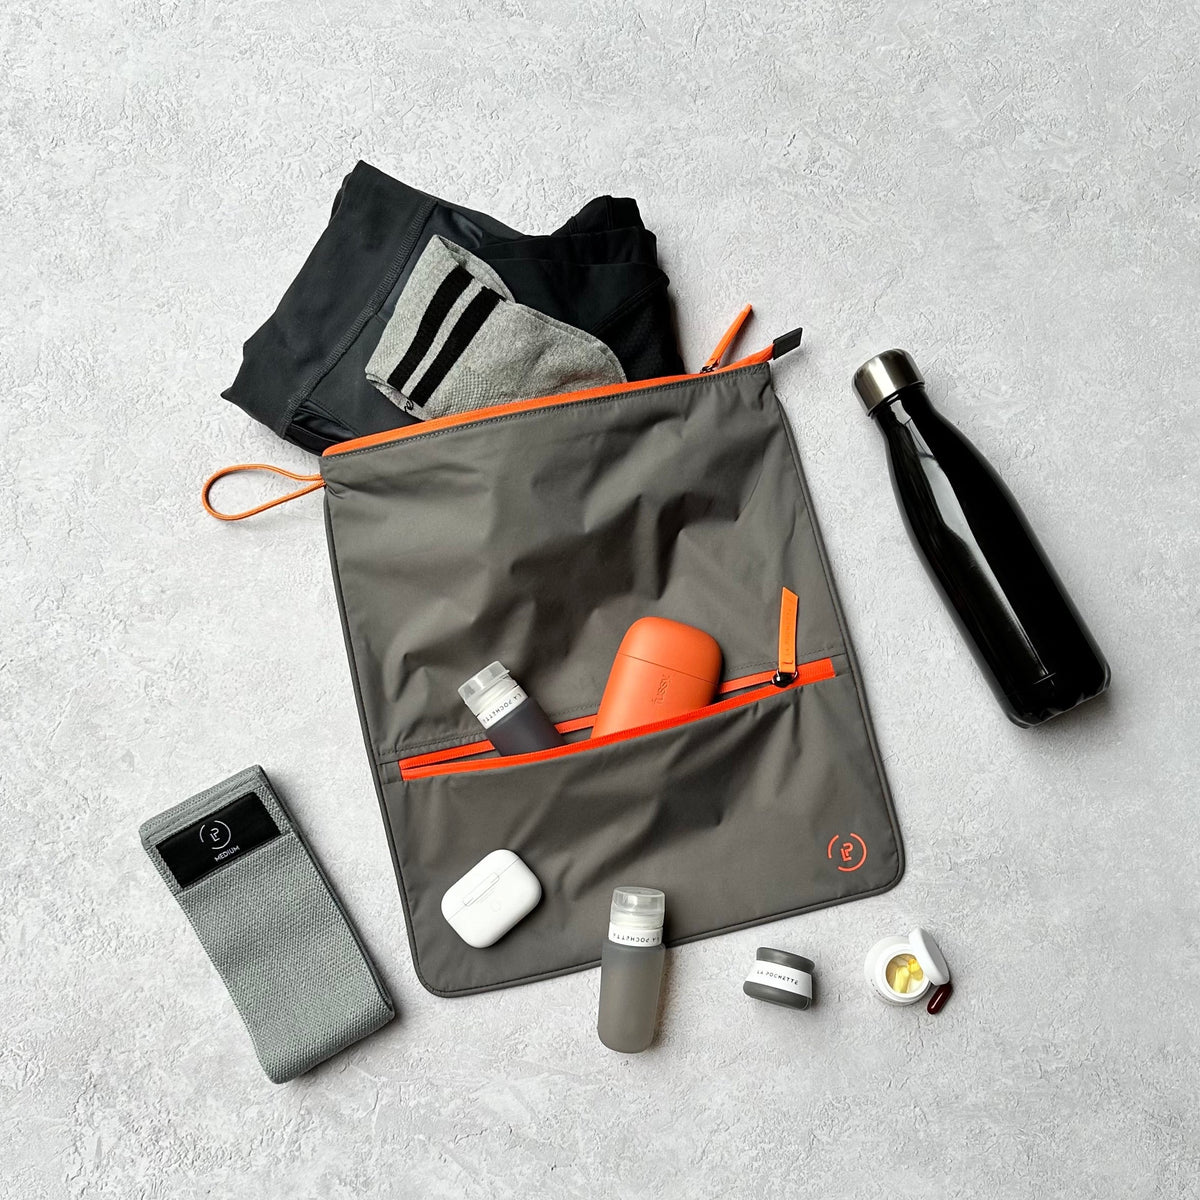 Sweat bag in grey and orange colour with resistance band, travel bottles and water bottle